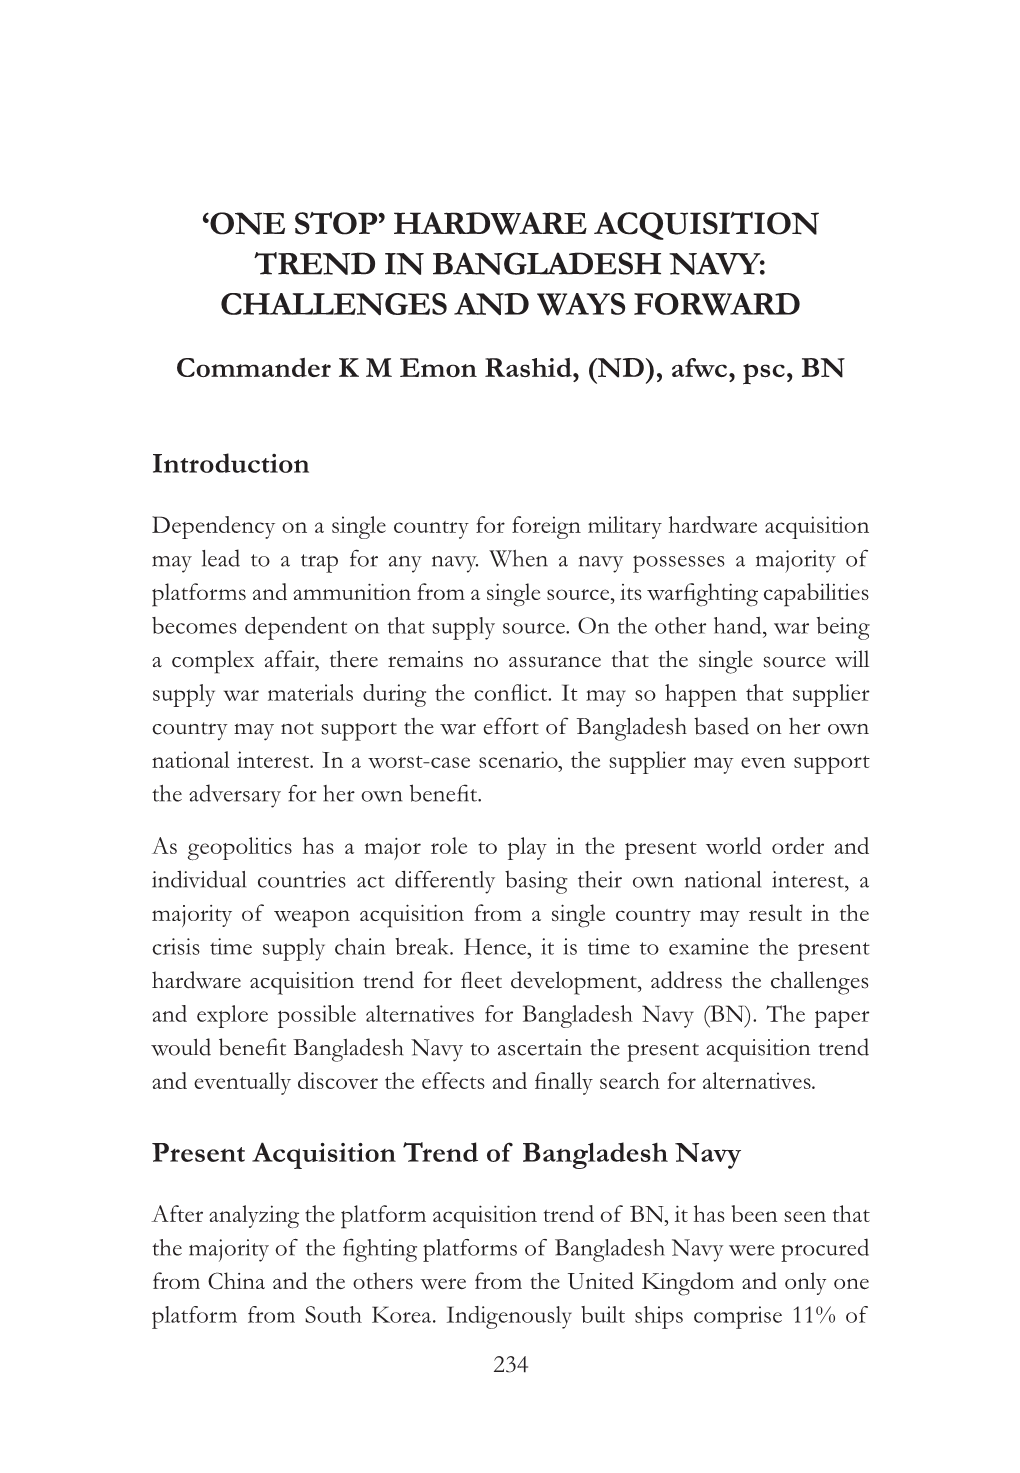 Hardware Acquisition Trend in Bangladesh Navy: Challenges and Ways Forward